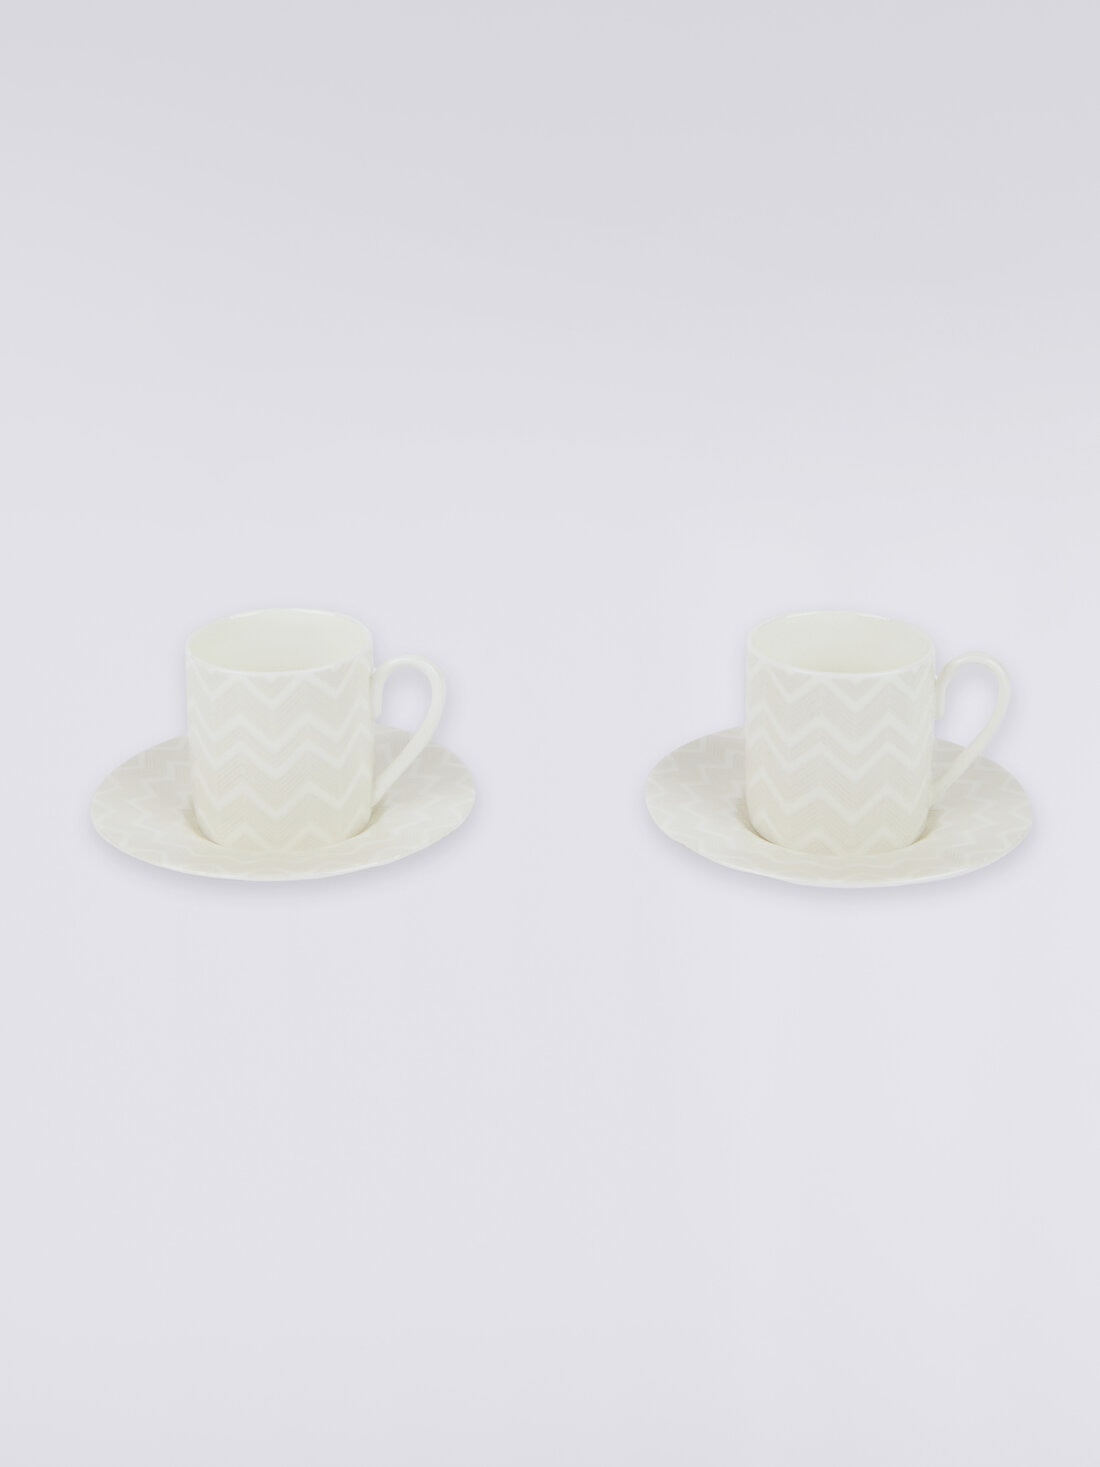 Zigzag White Set of 2 coffee cups & saucers, White  - 8051575779169 - 2